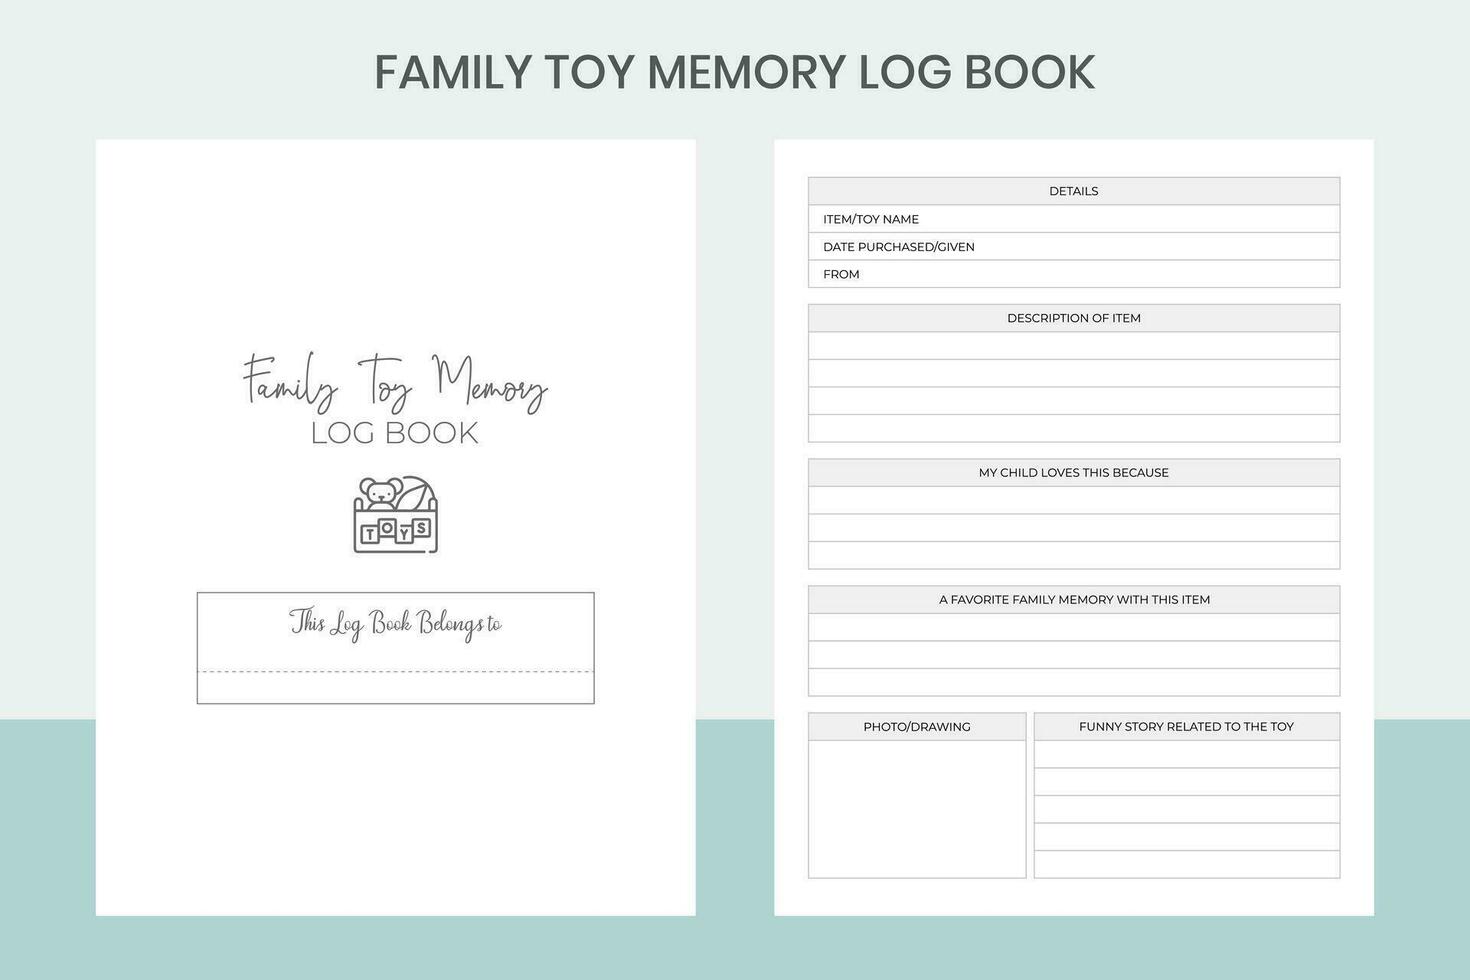 Family Toy Memory Log Book Pro Template vector